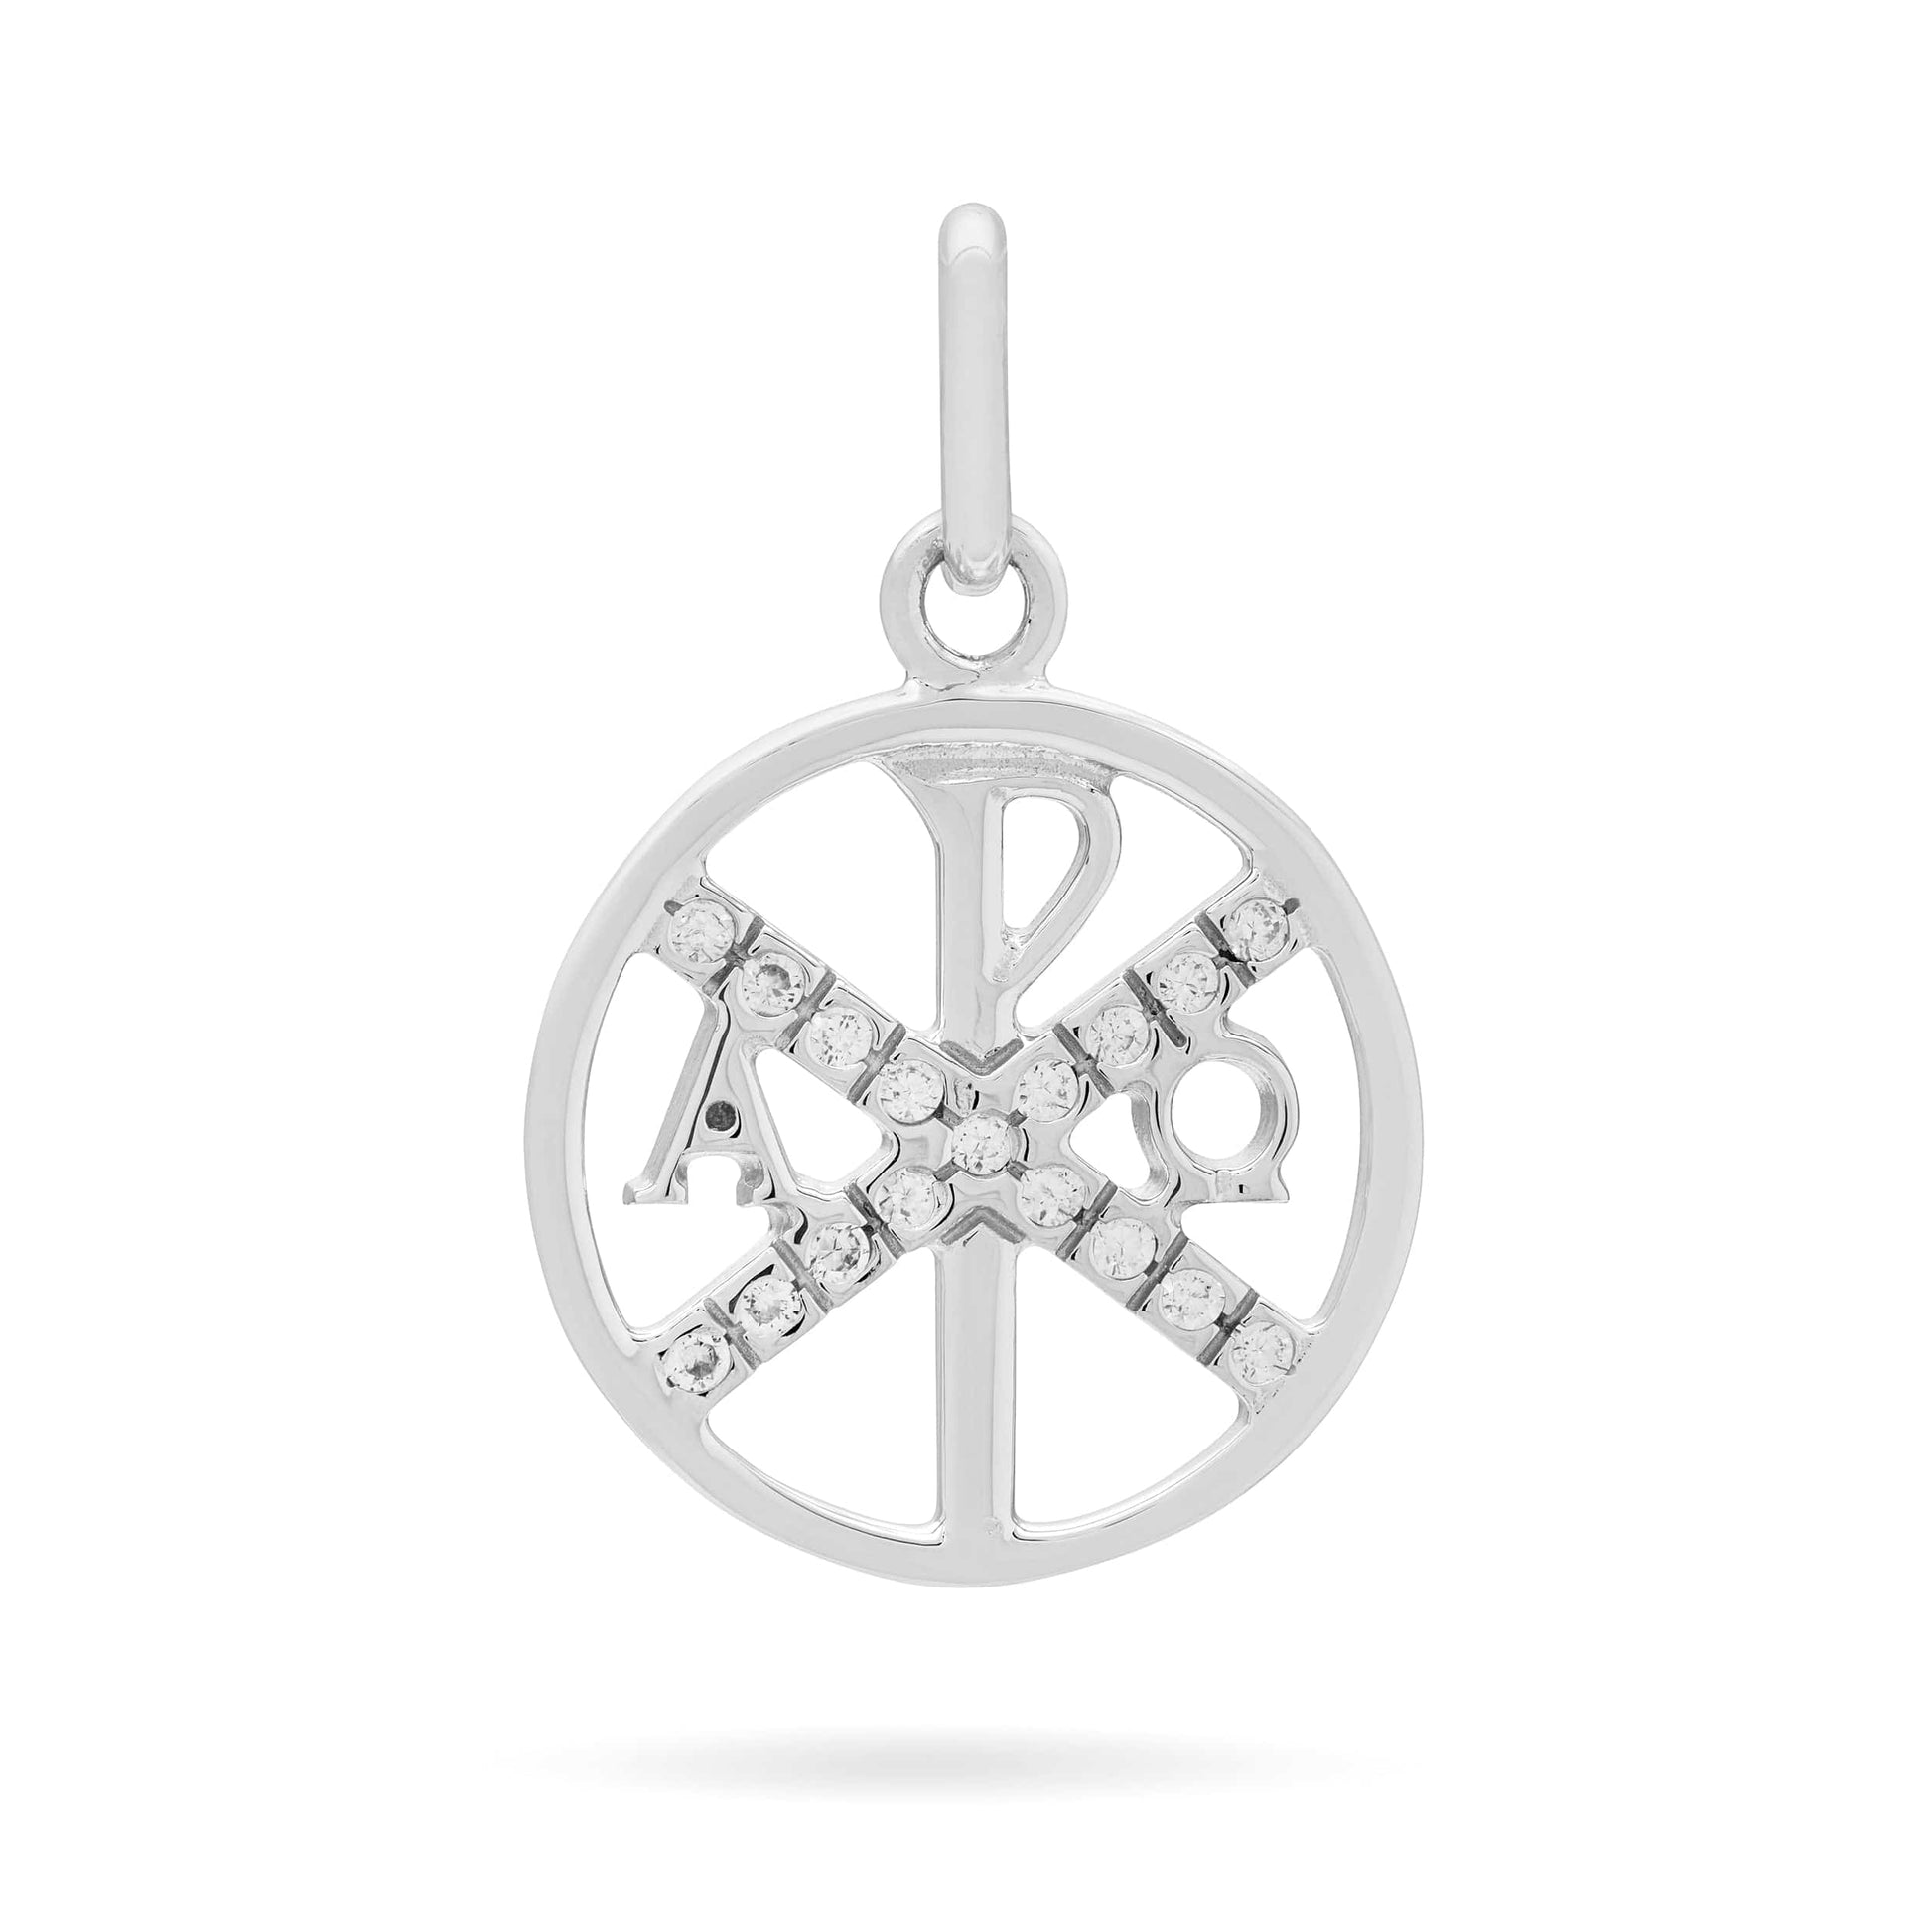 MONDO CATTOLICO 16 mm (0.63 in) White Gold Peace Cross Medal with Crystals